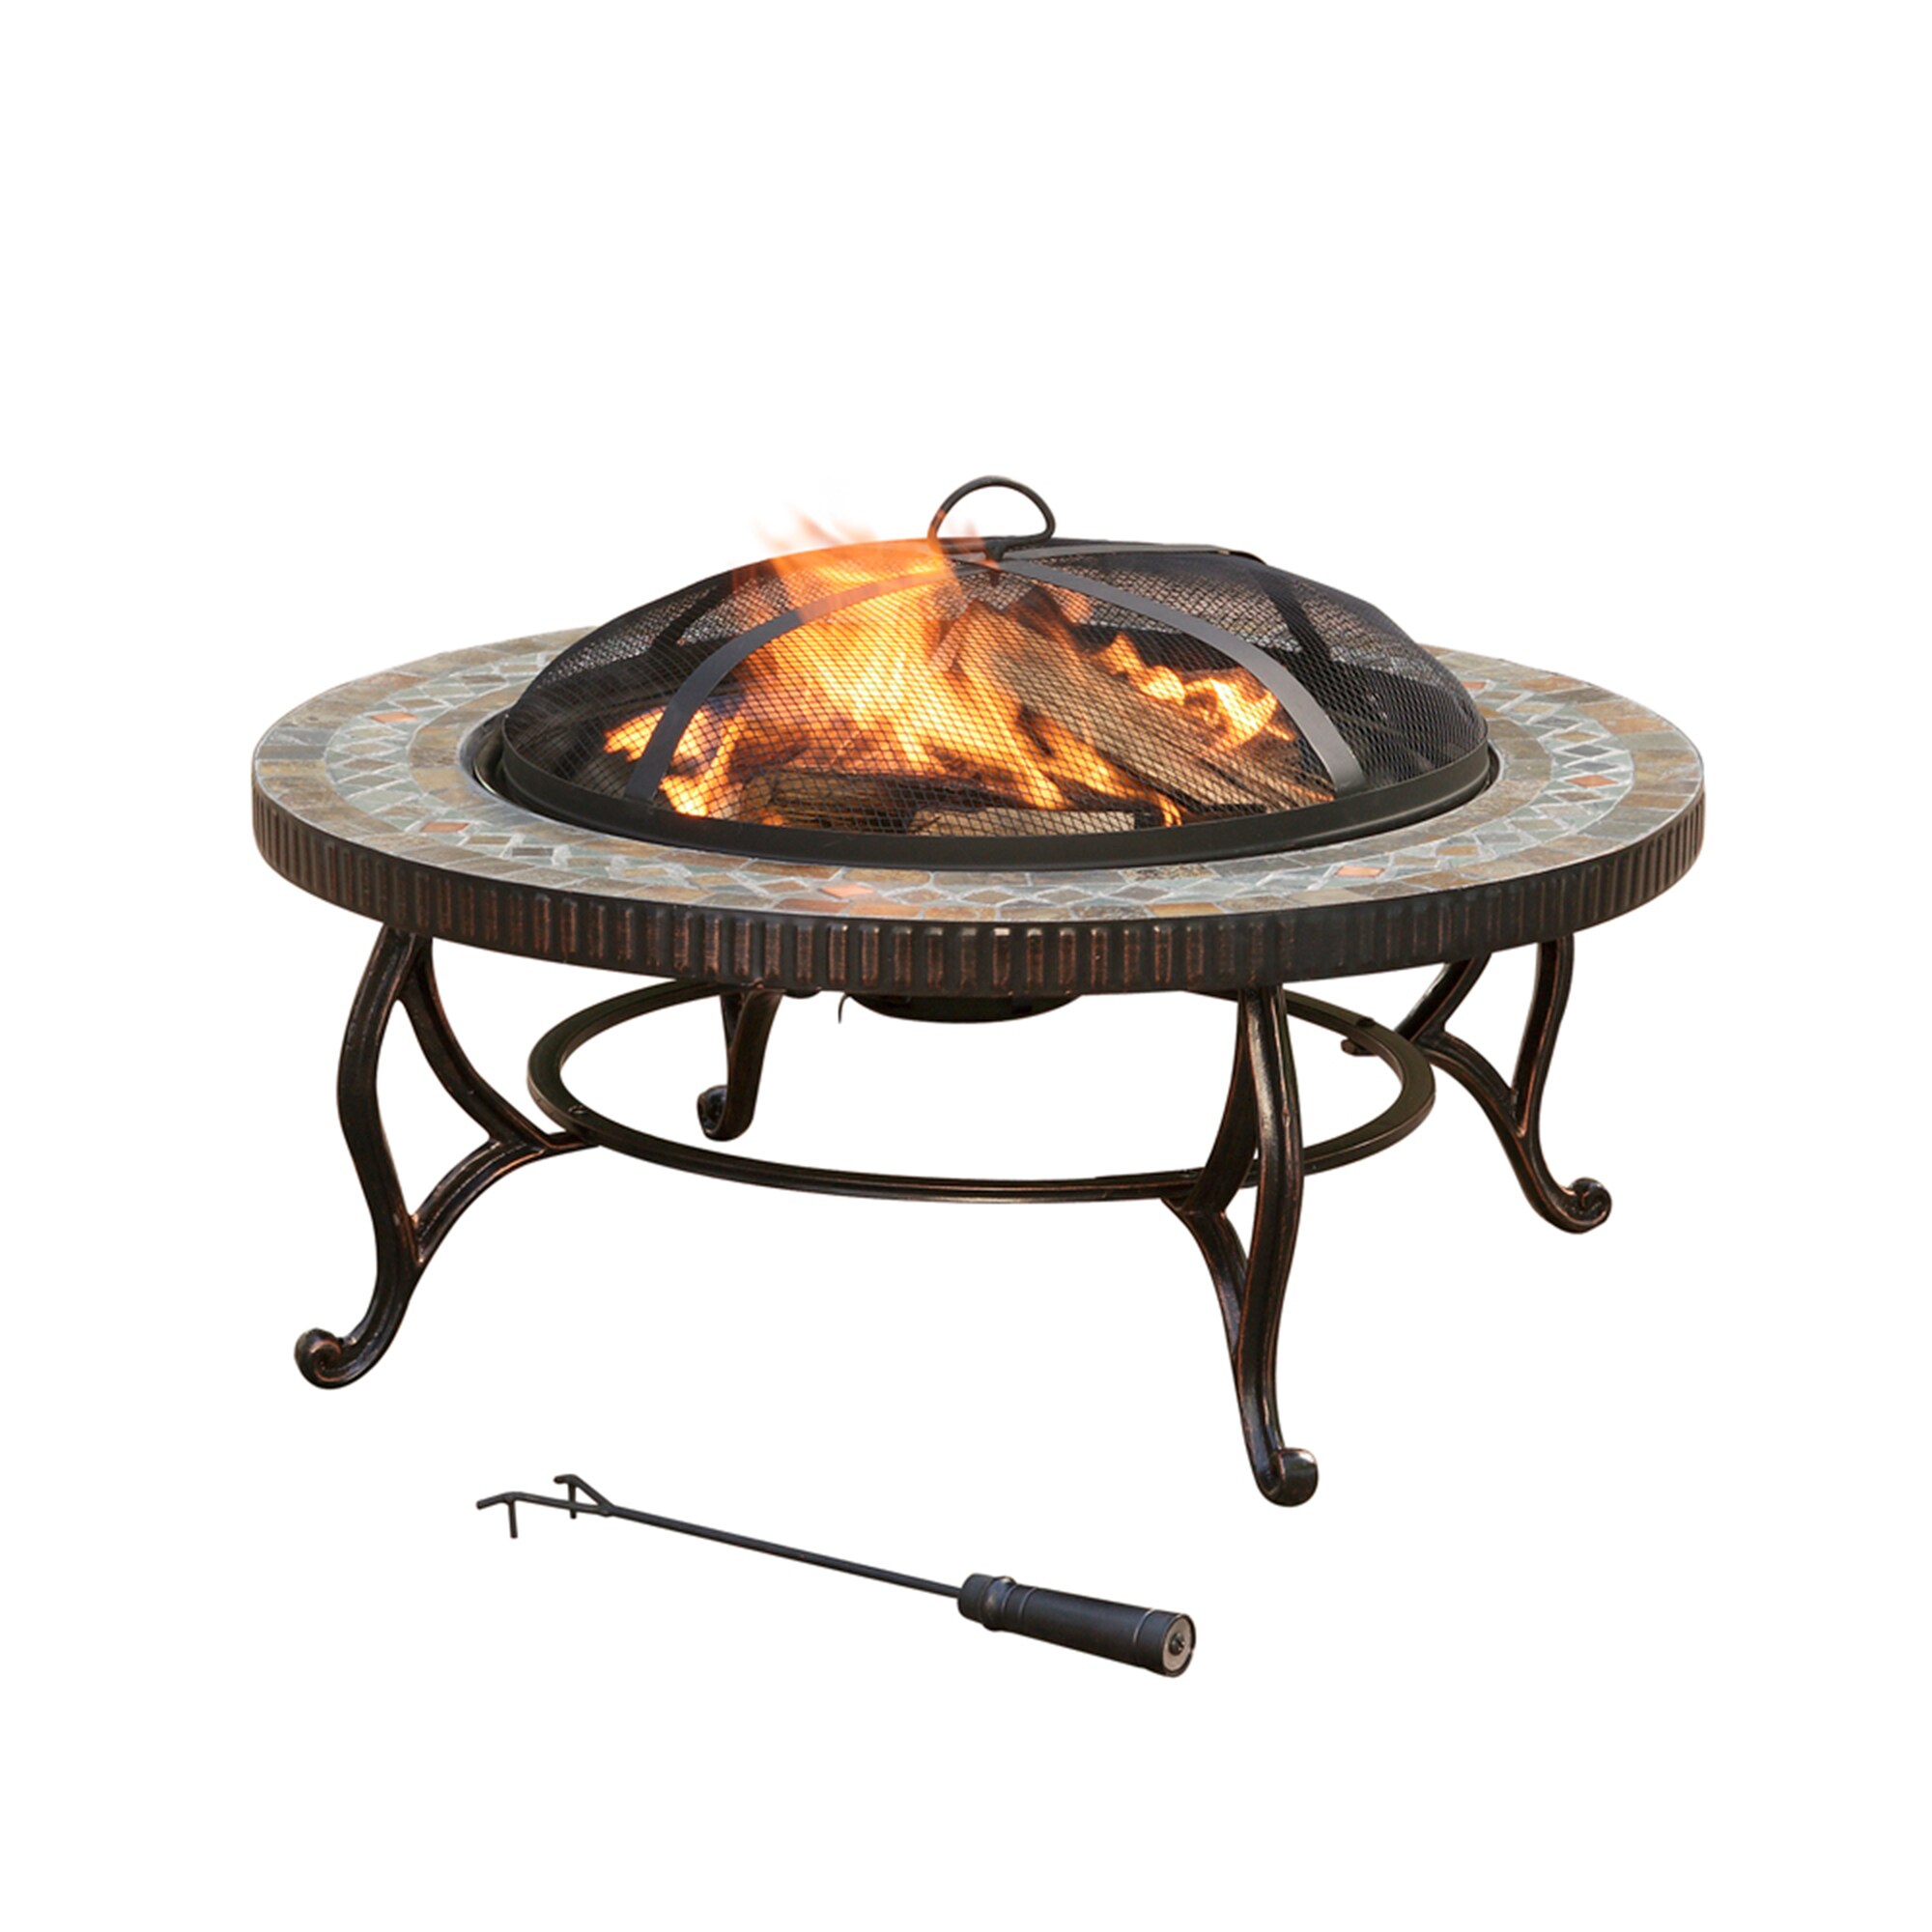 Wood Burning Fire Pits, Backyard Creations 34 Inch Fire Pit Cover